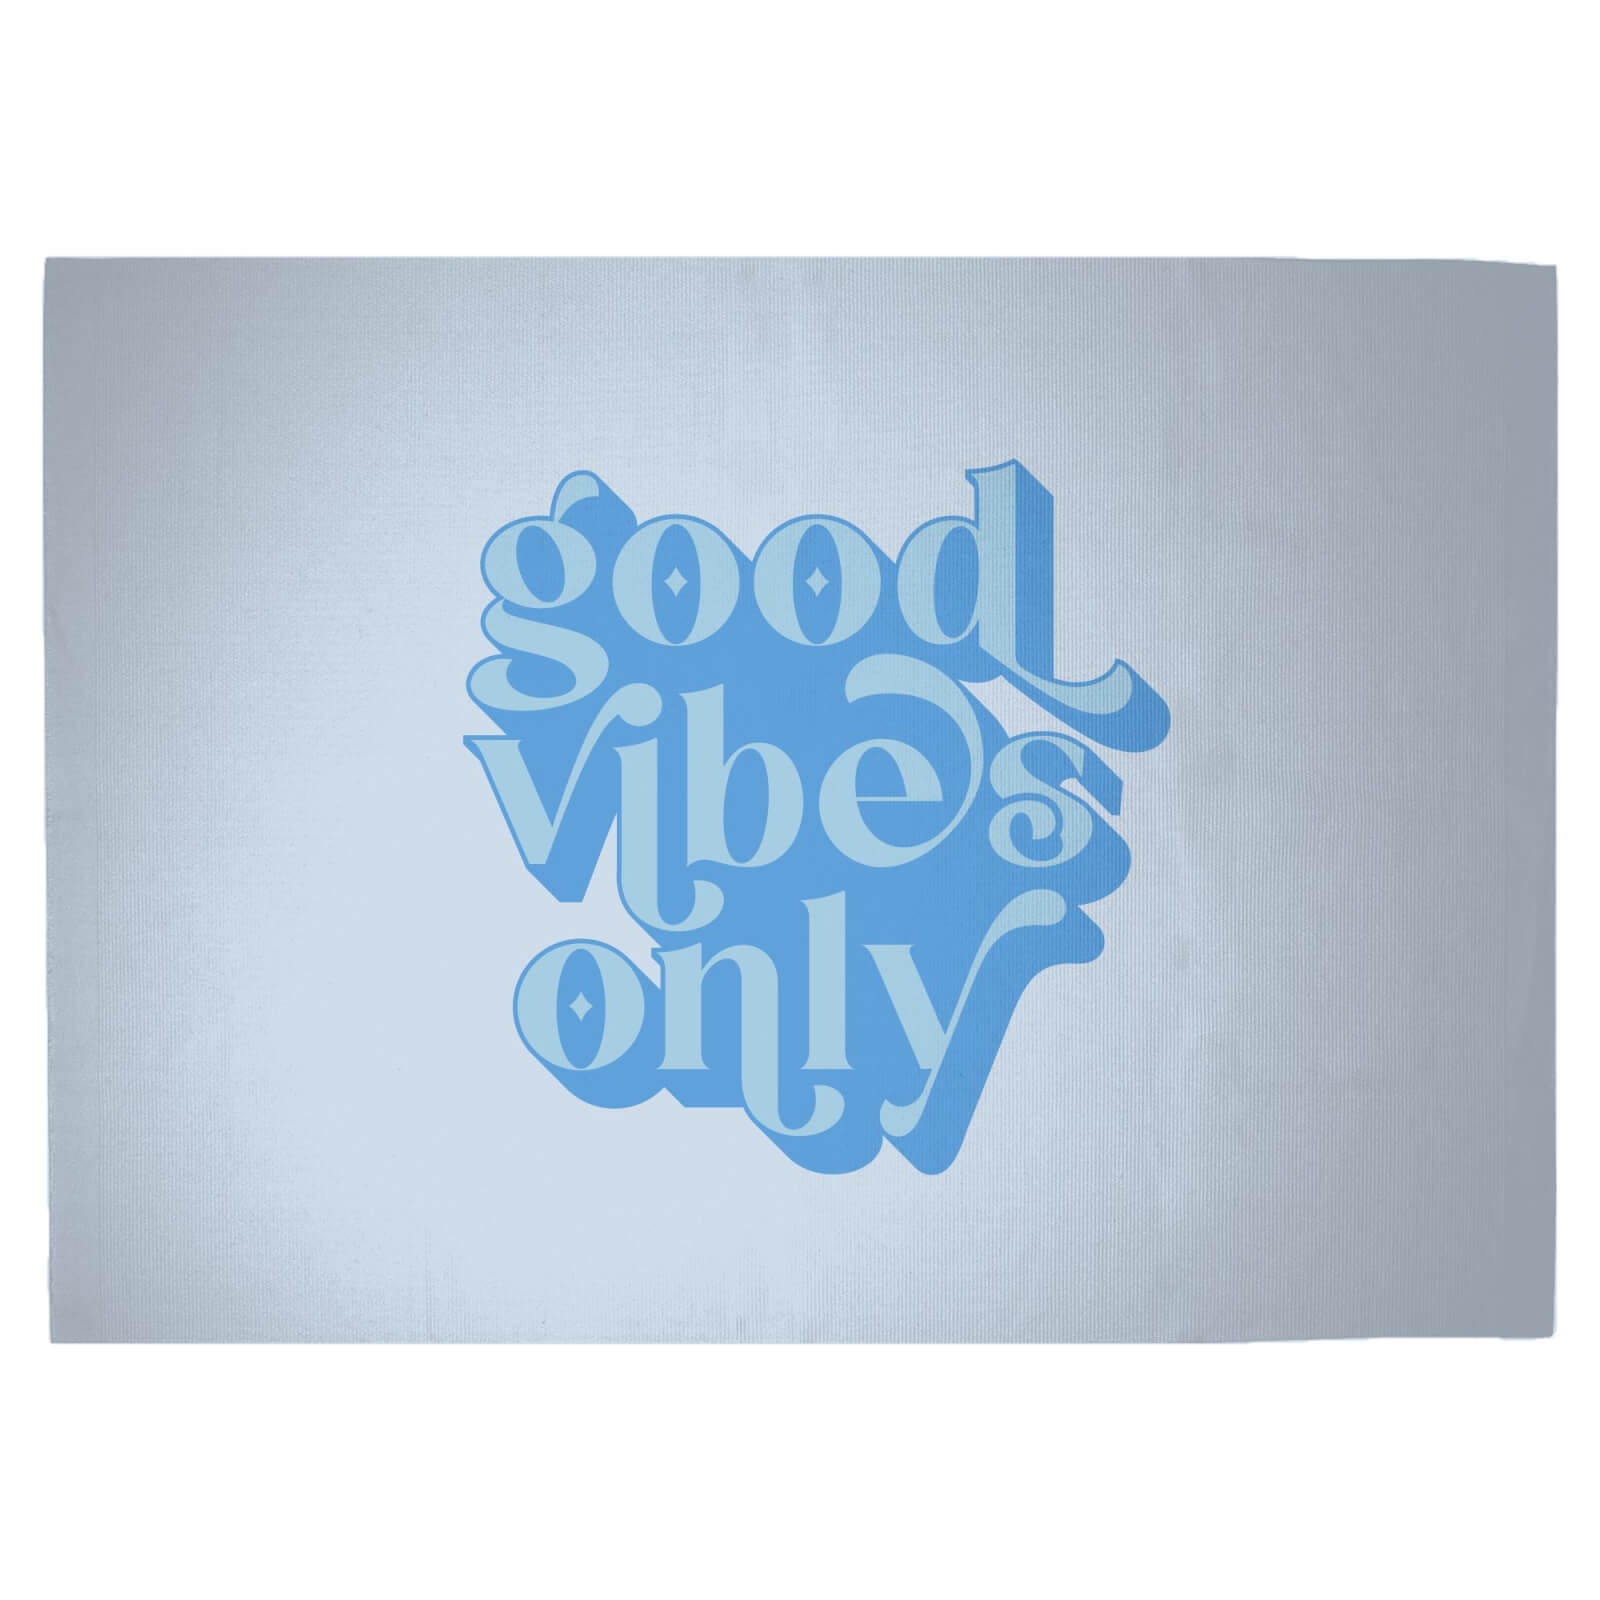 Good Vibes Only Woven Rug - Large